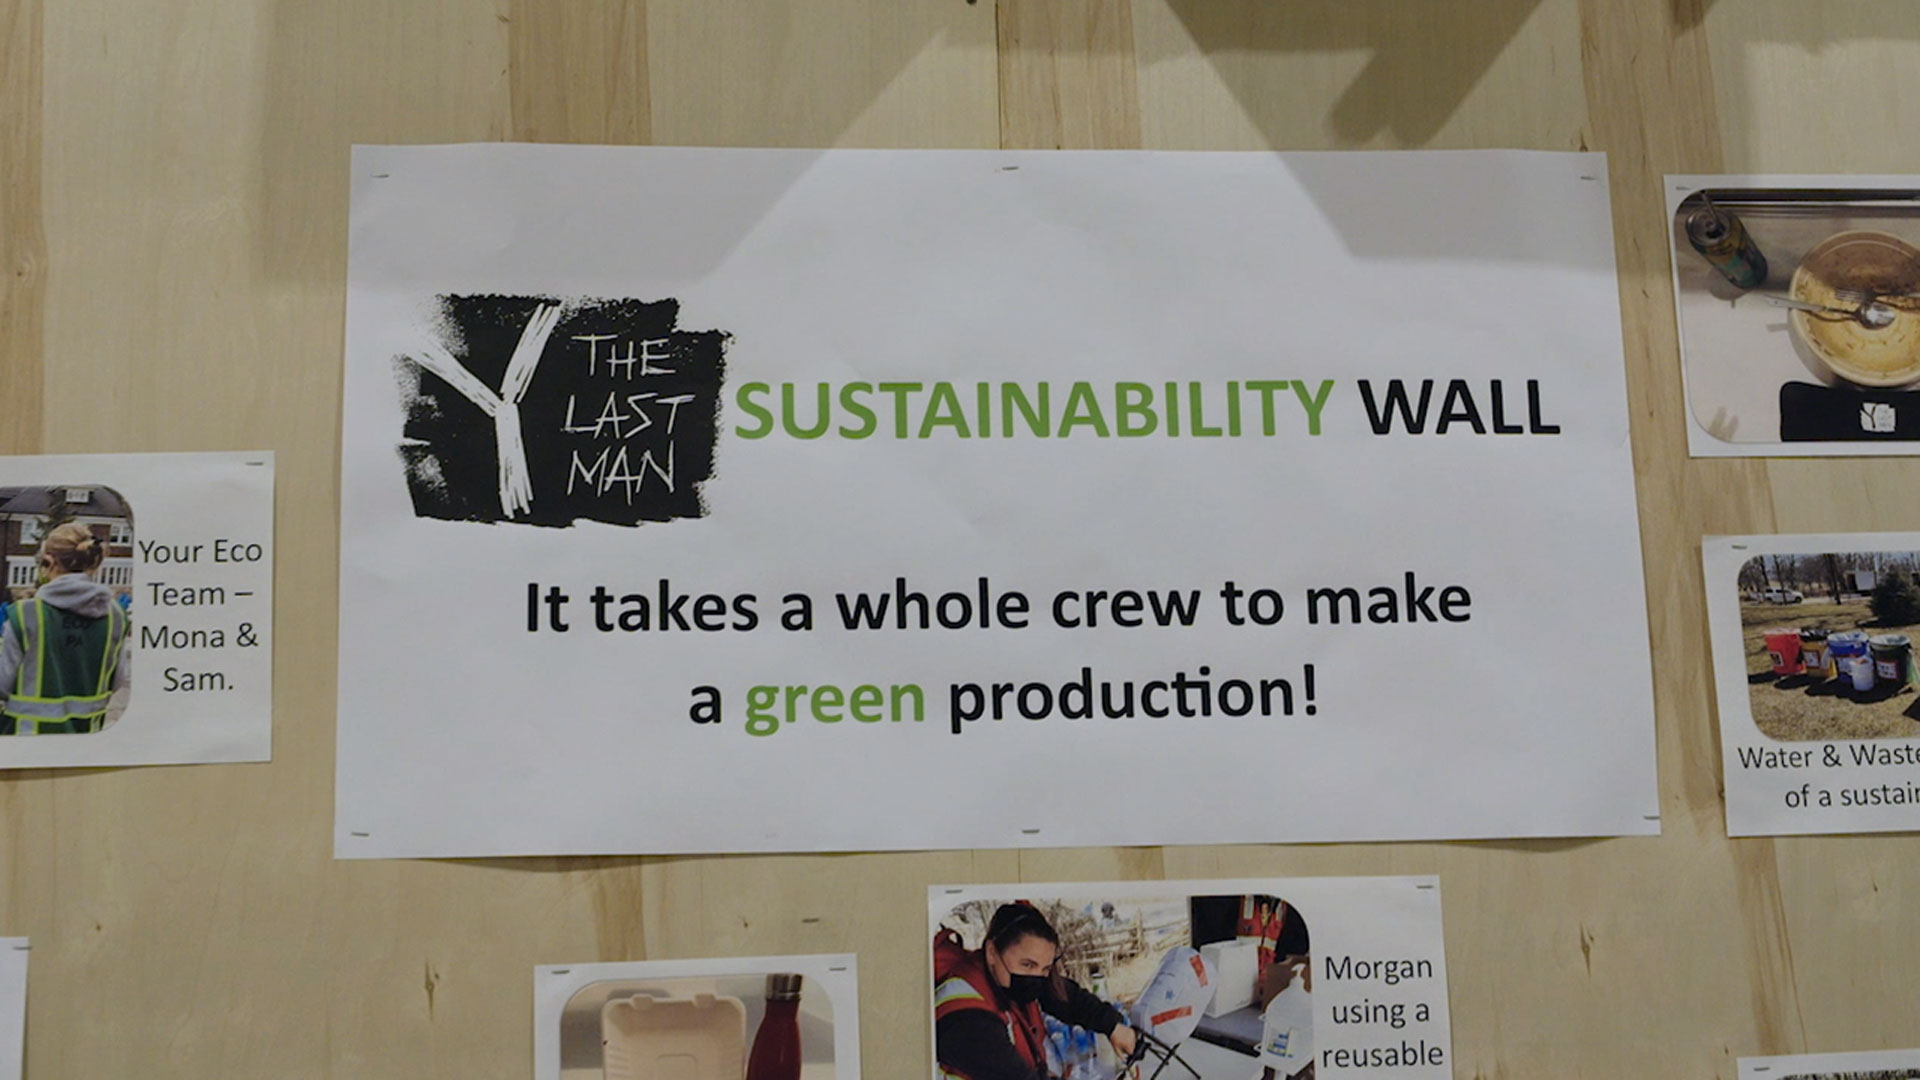 Sign taped to a wall saying "Sustainability wall It takes a whole crew to make a green production"